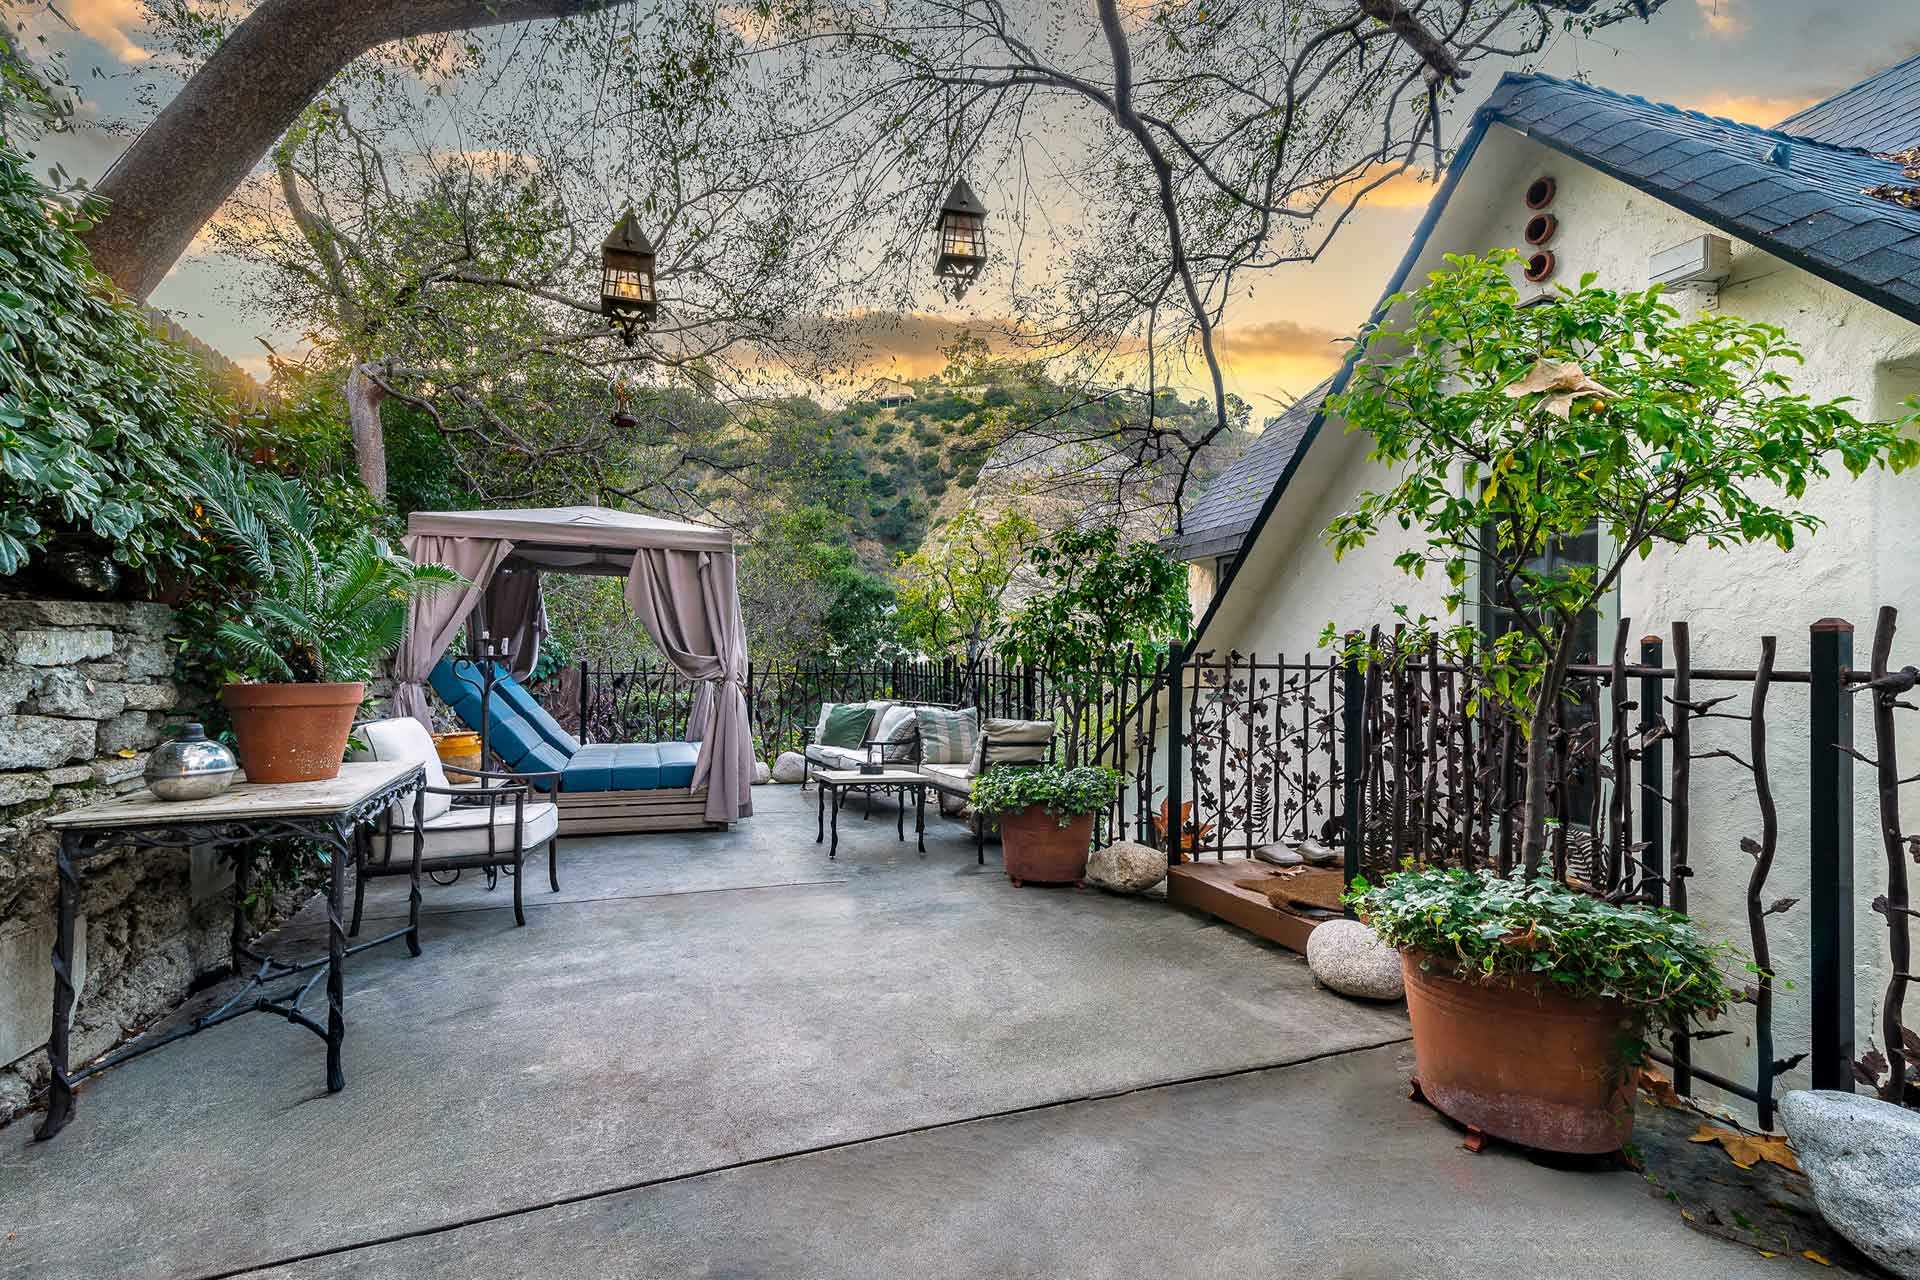 Outdoor terrace with sun loungers, plants, and views over Laurel Canyon.